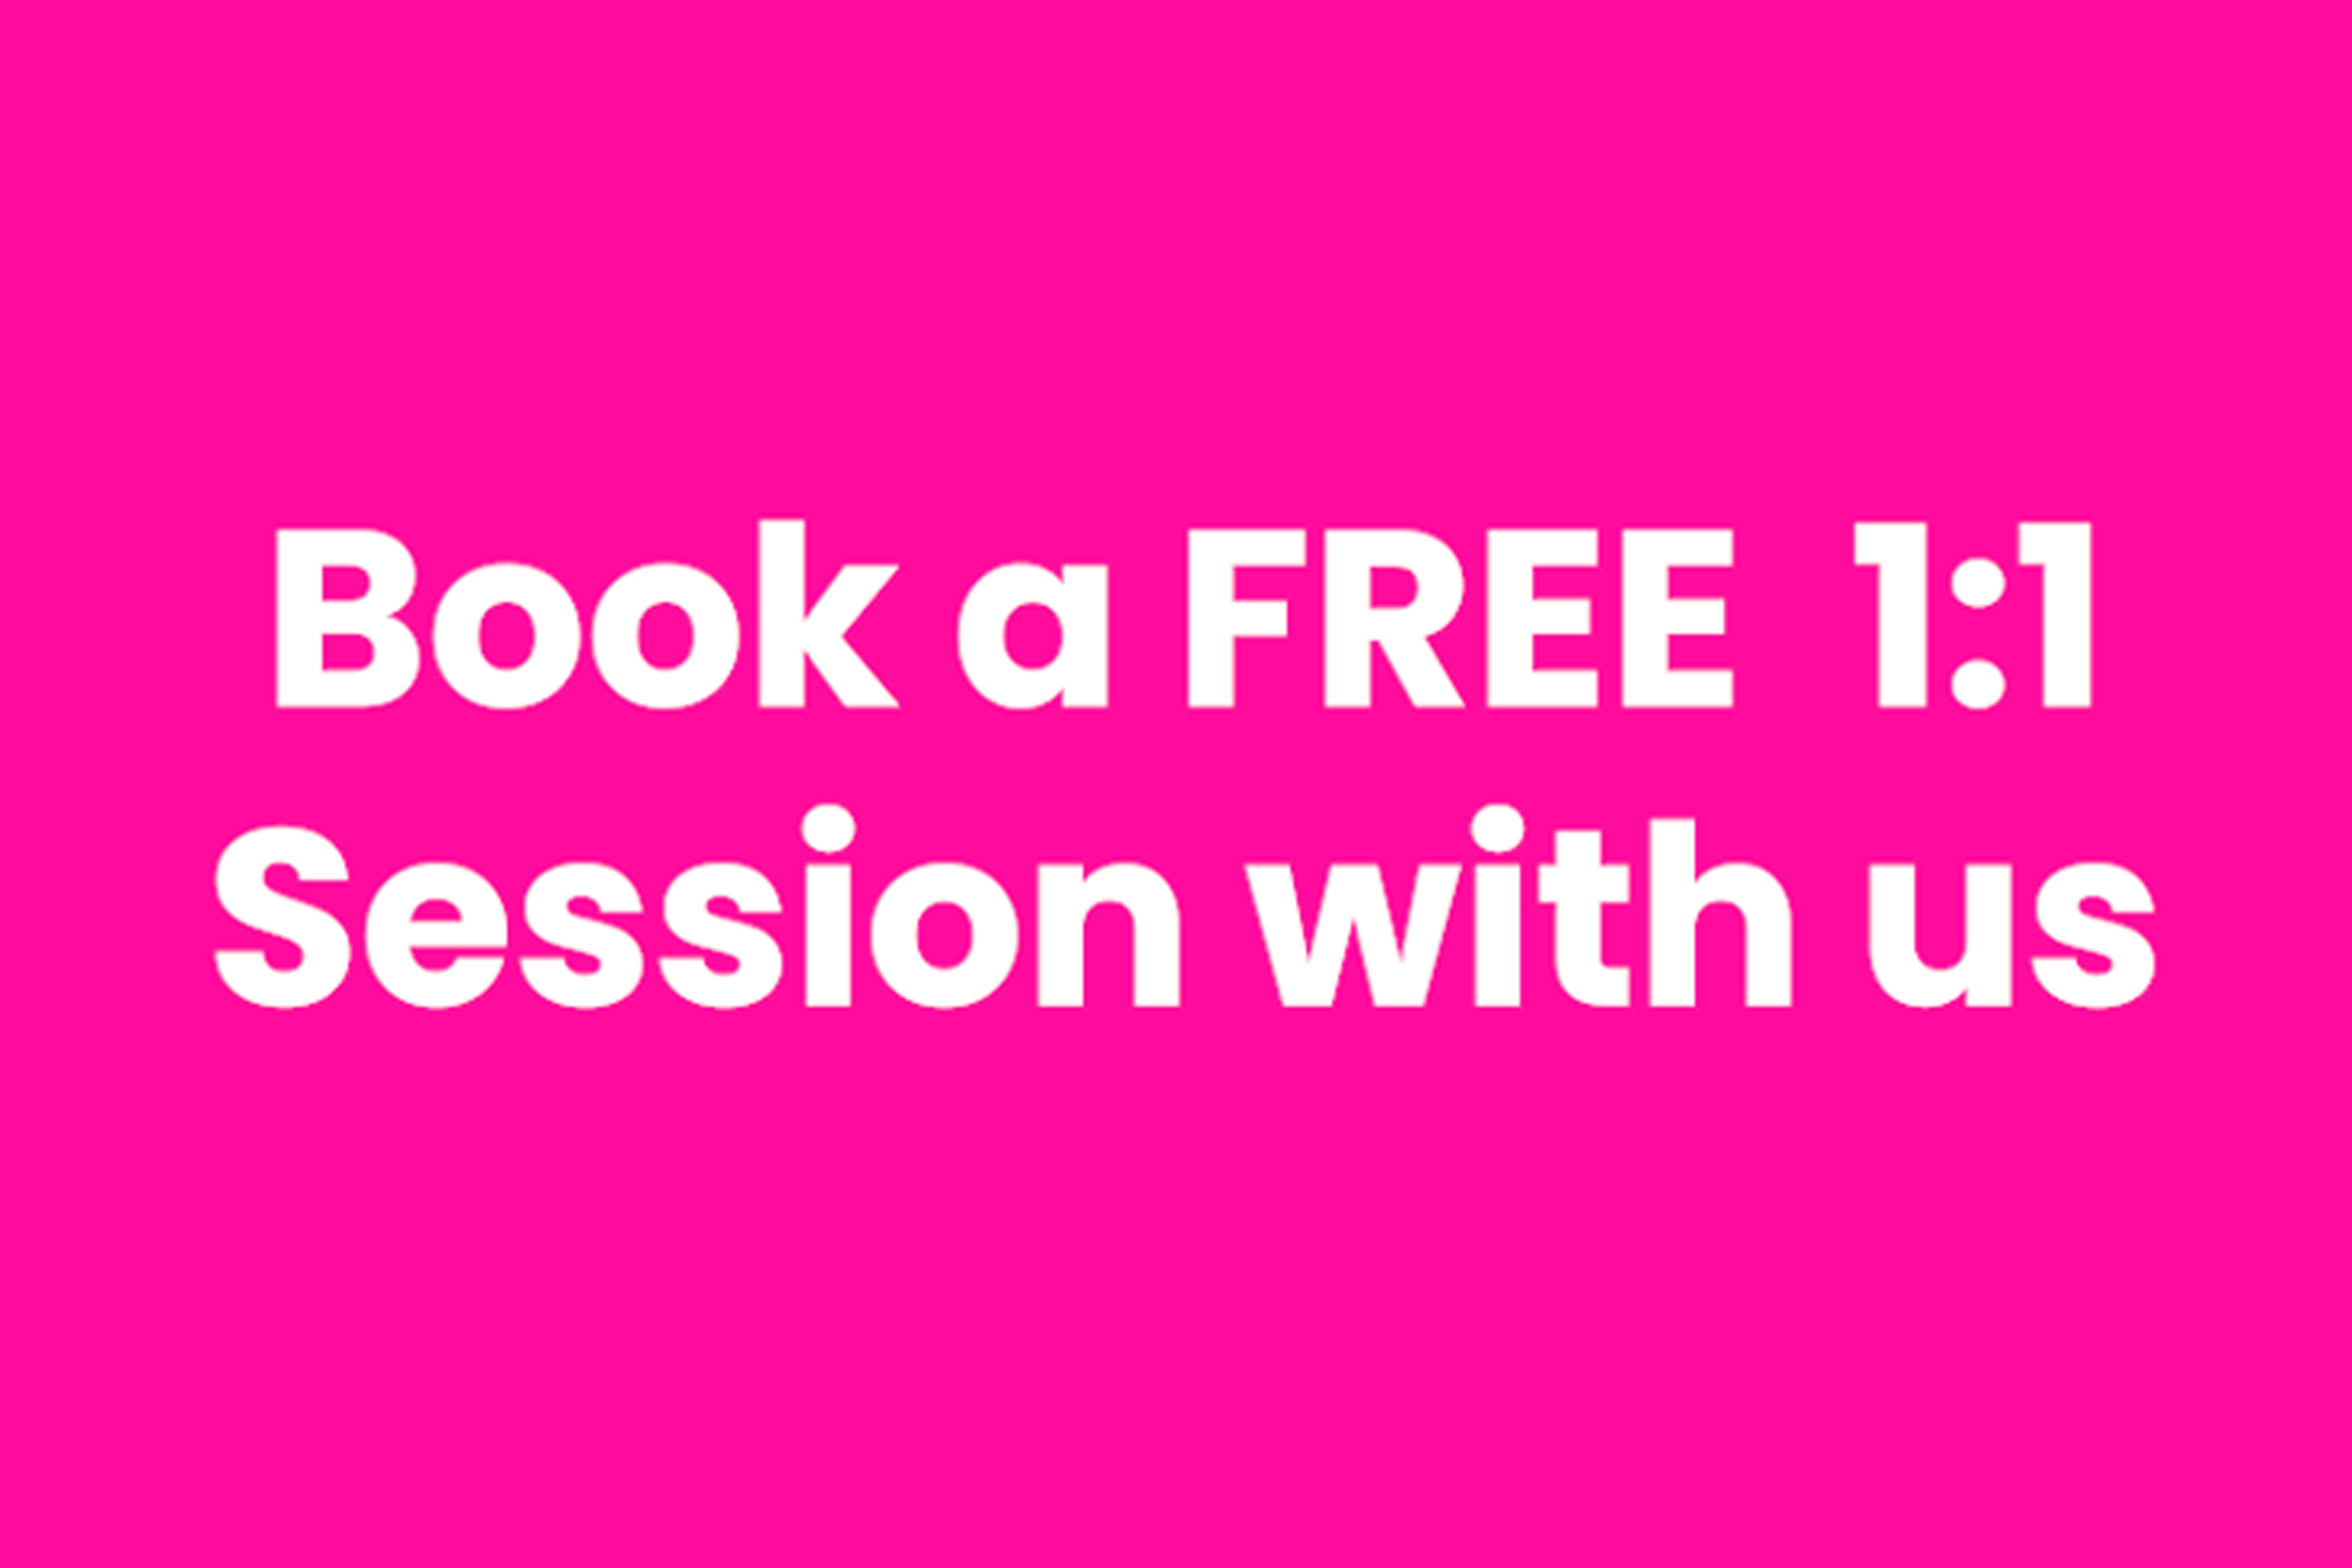 Book a FREE 1:1 Music Session with Artium Academy